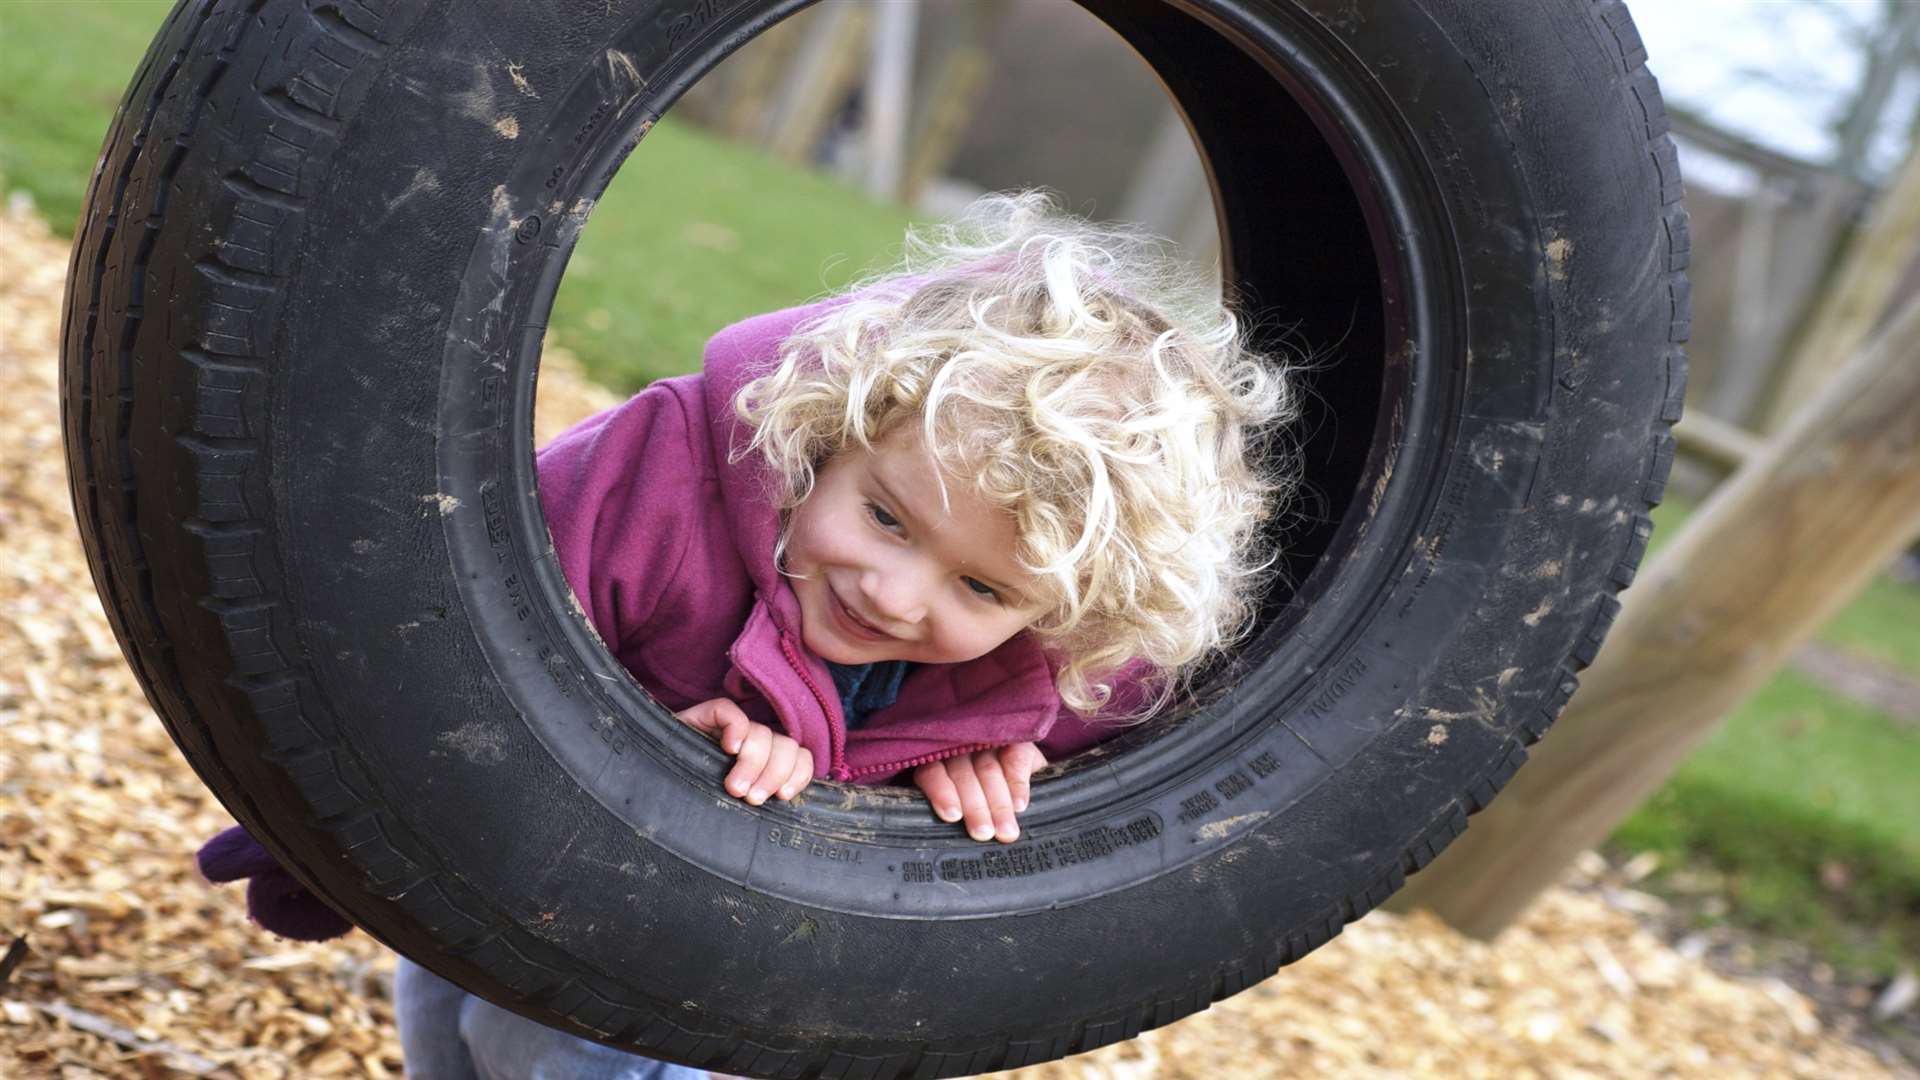 There's a fab adventure playground to explore at Penshurst Place